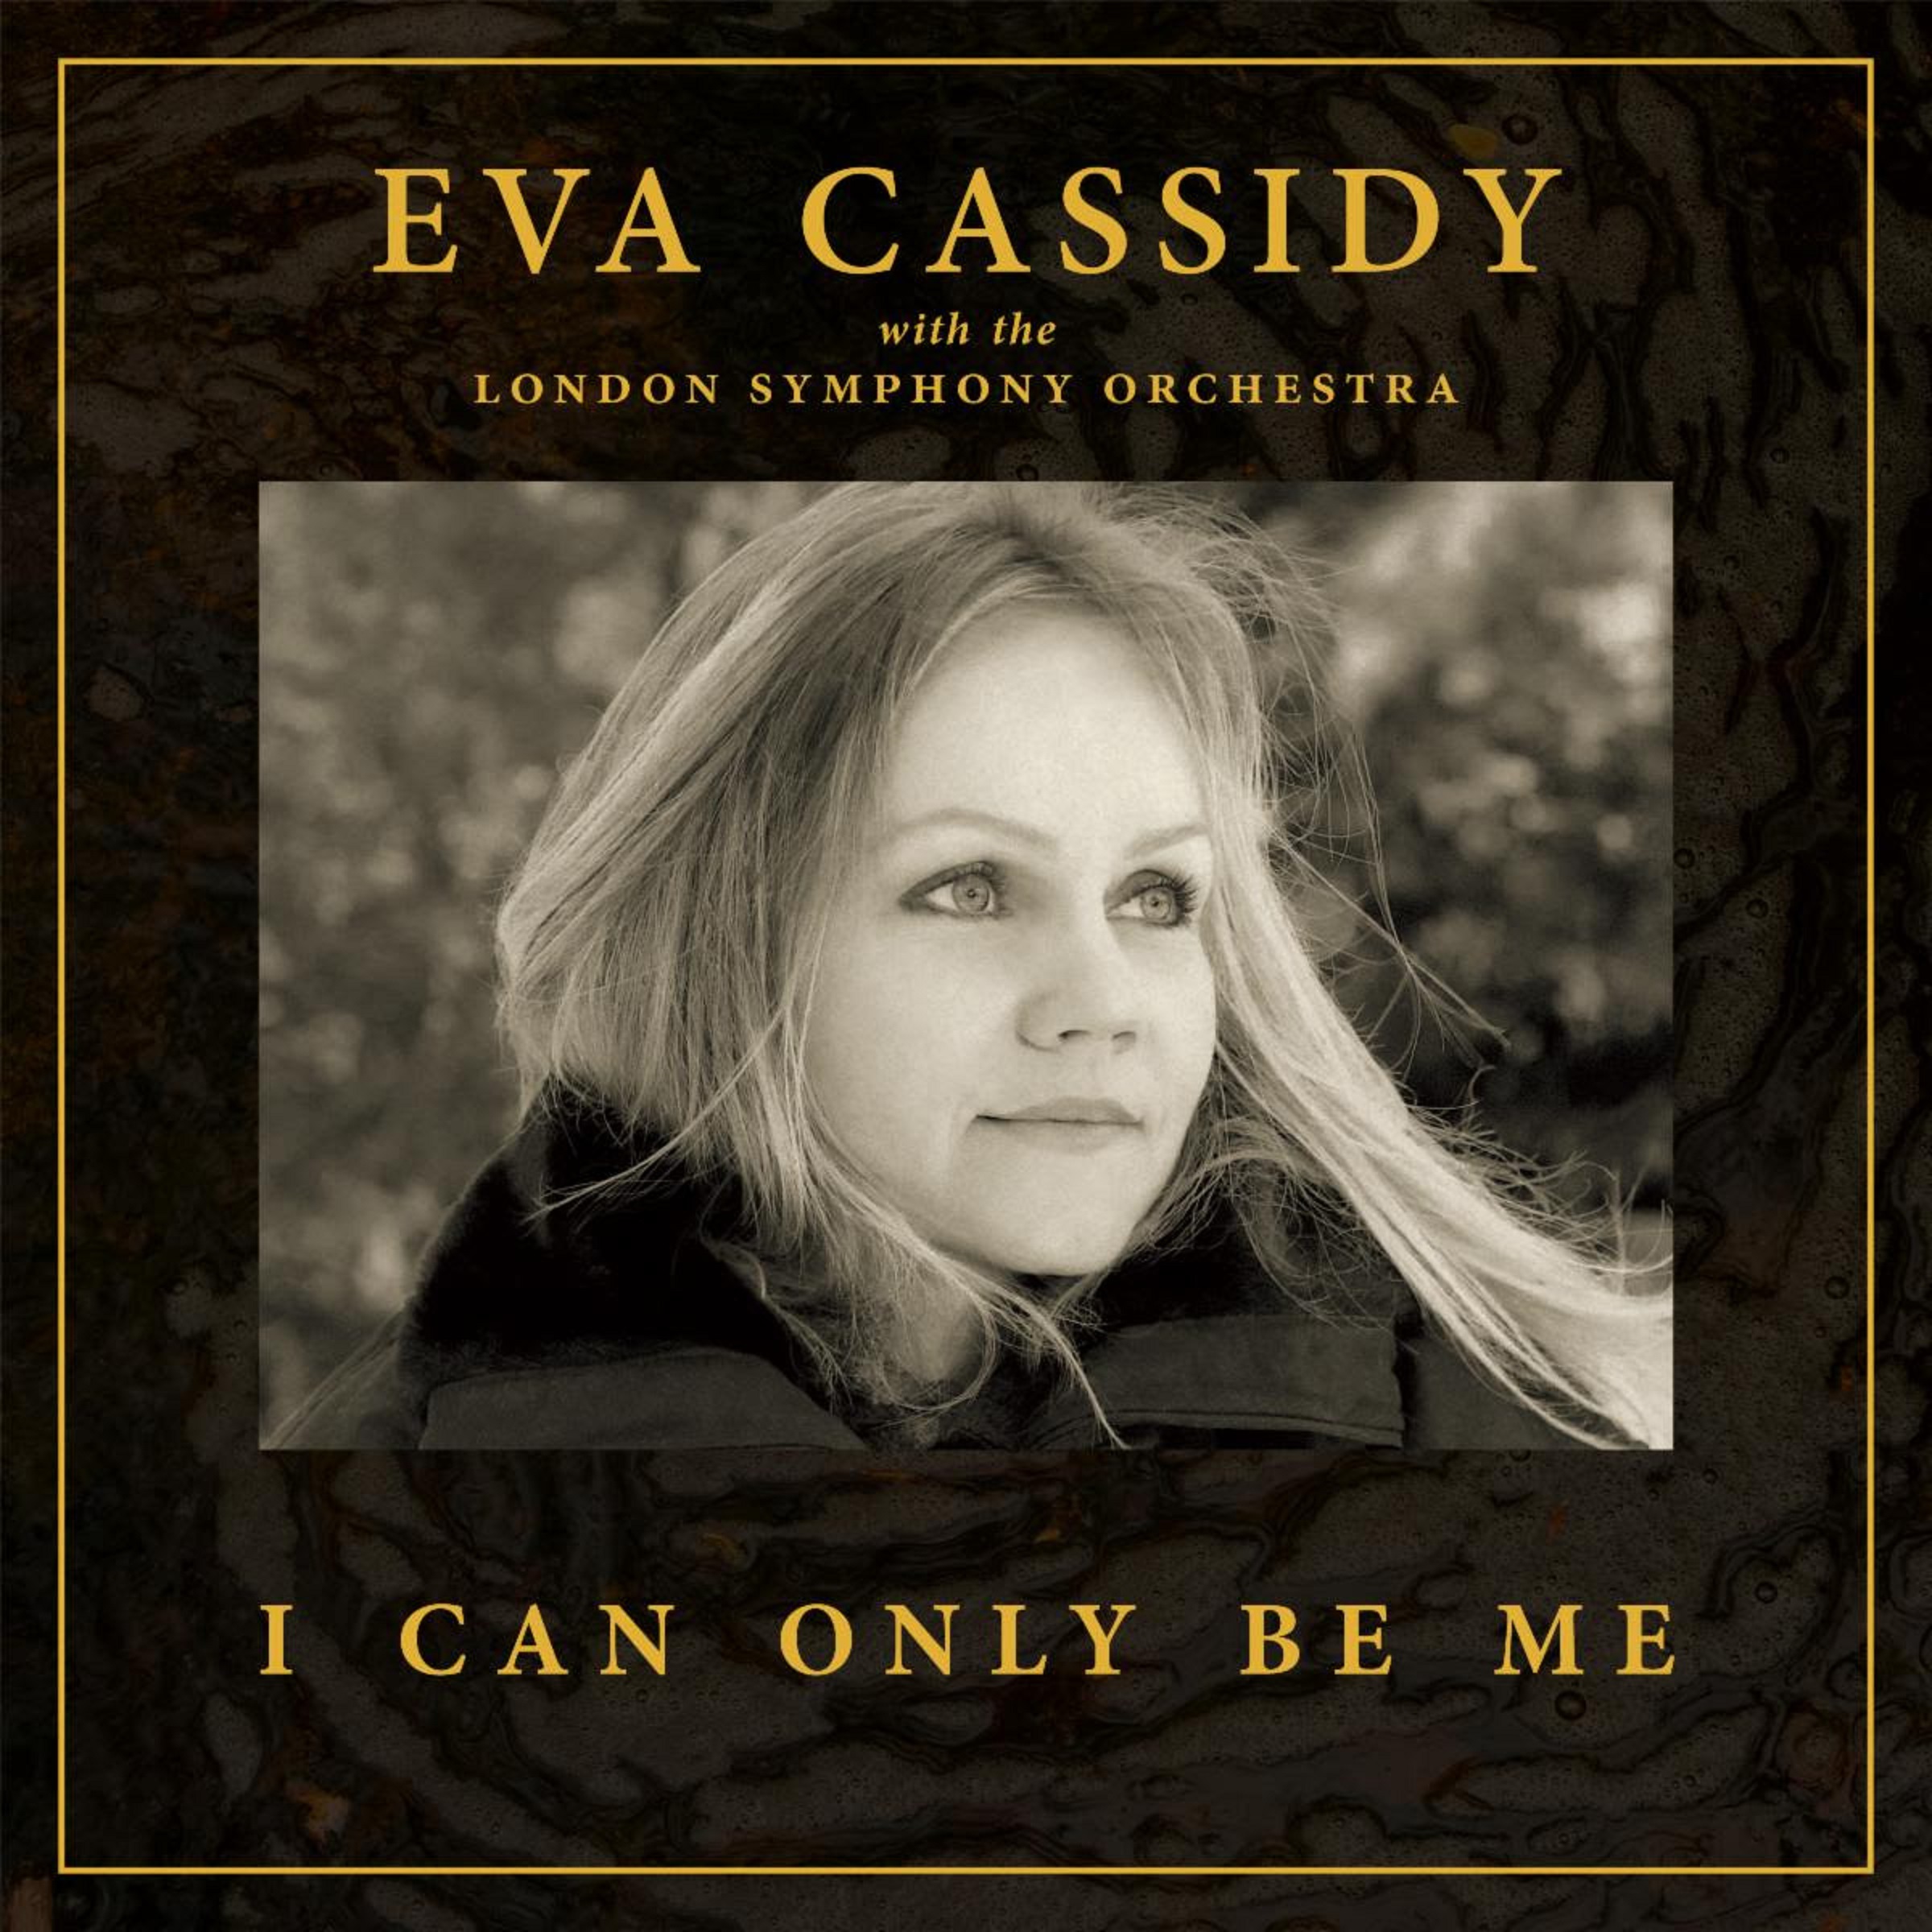 Eva Cassidy's Impeccable Voice Paired with London Symphony Orchestra for "I Can Only Be Me" Album Coming March 3